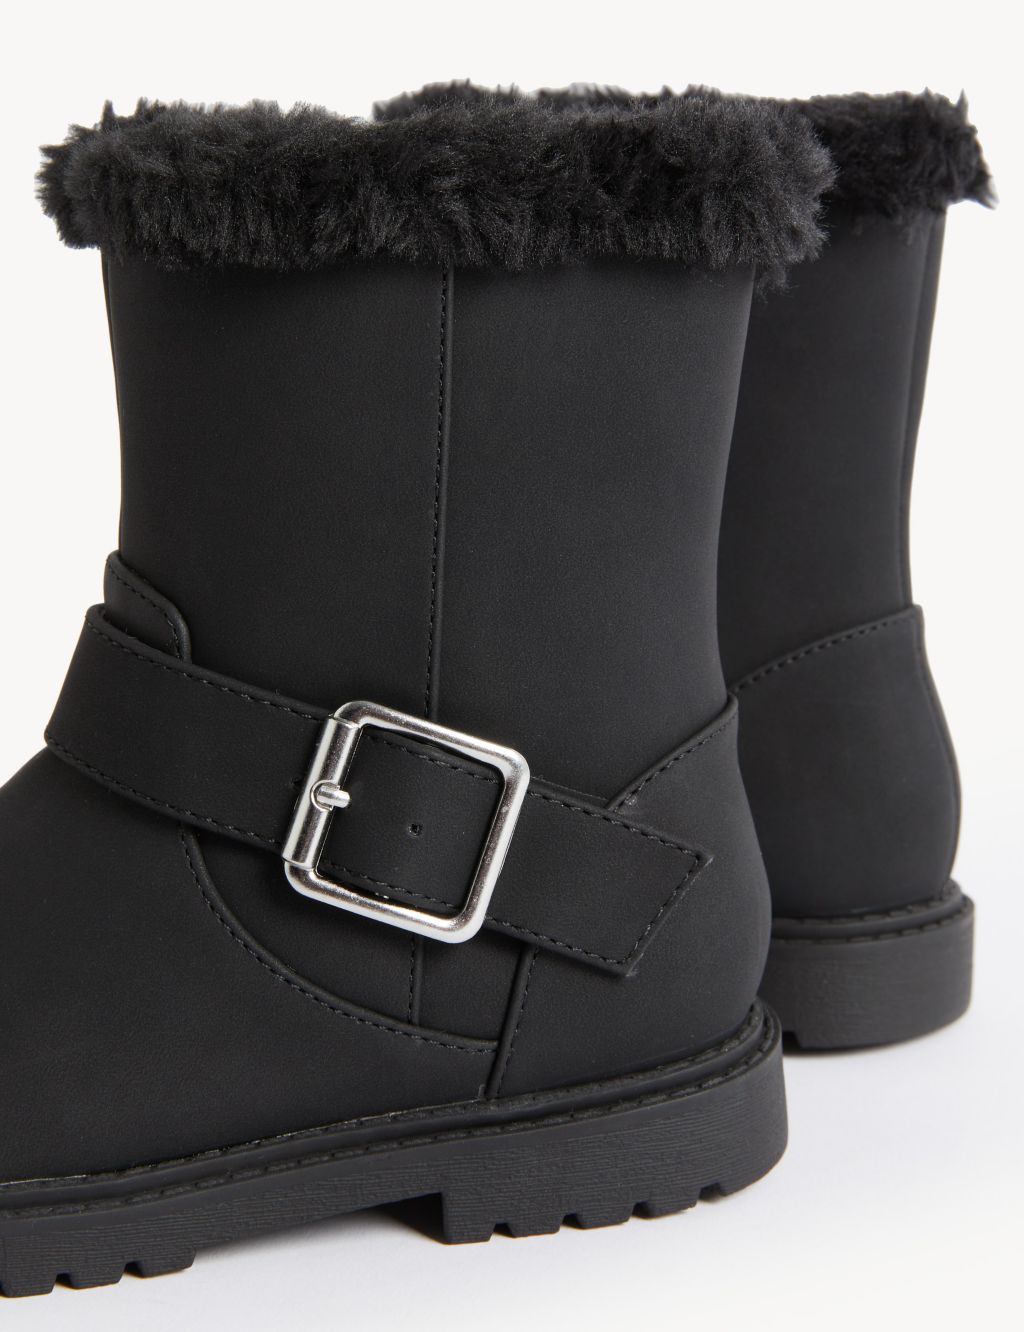 Kids' Faux Fur Lined Buckle Ankle Boots (4 Small - 13 Small) image 1